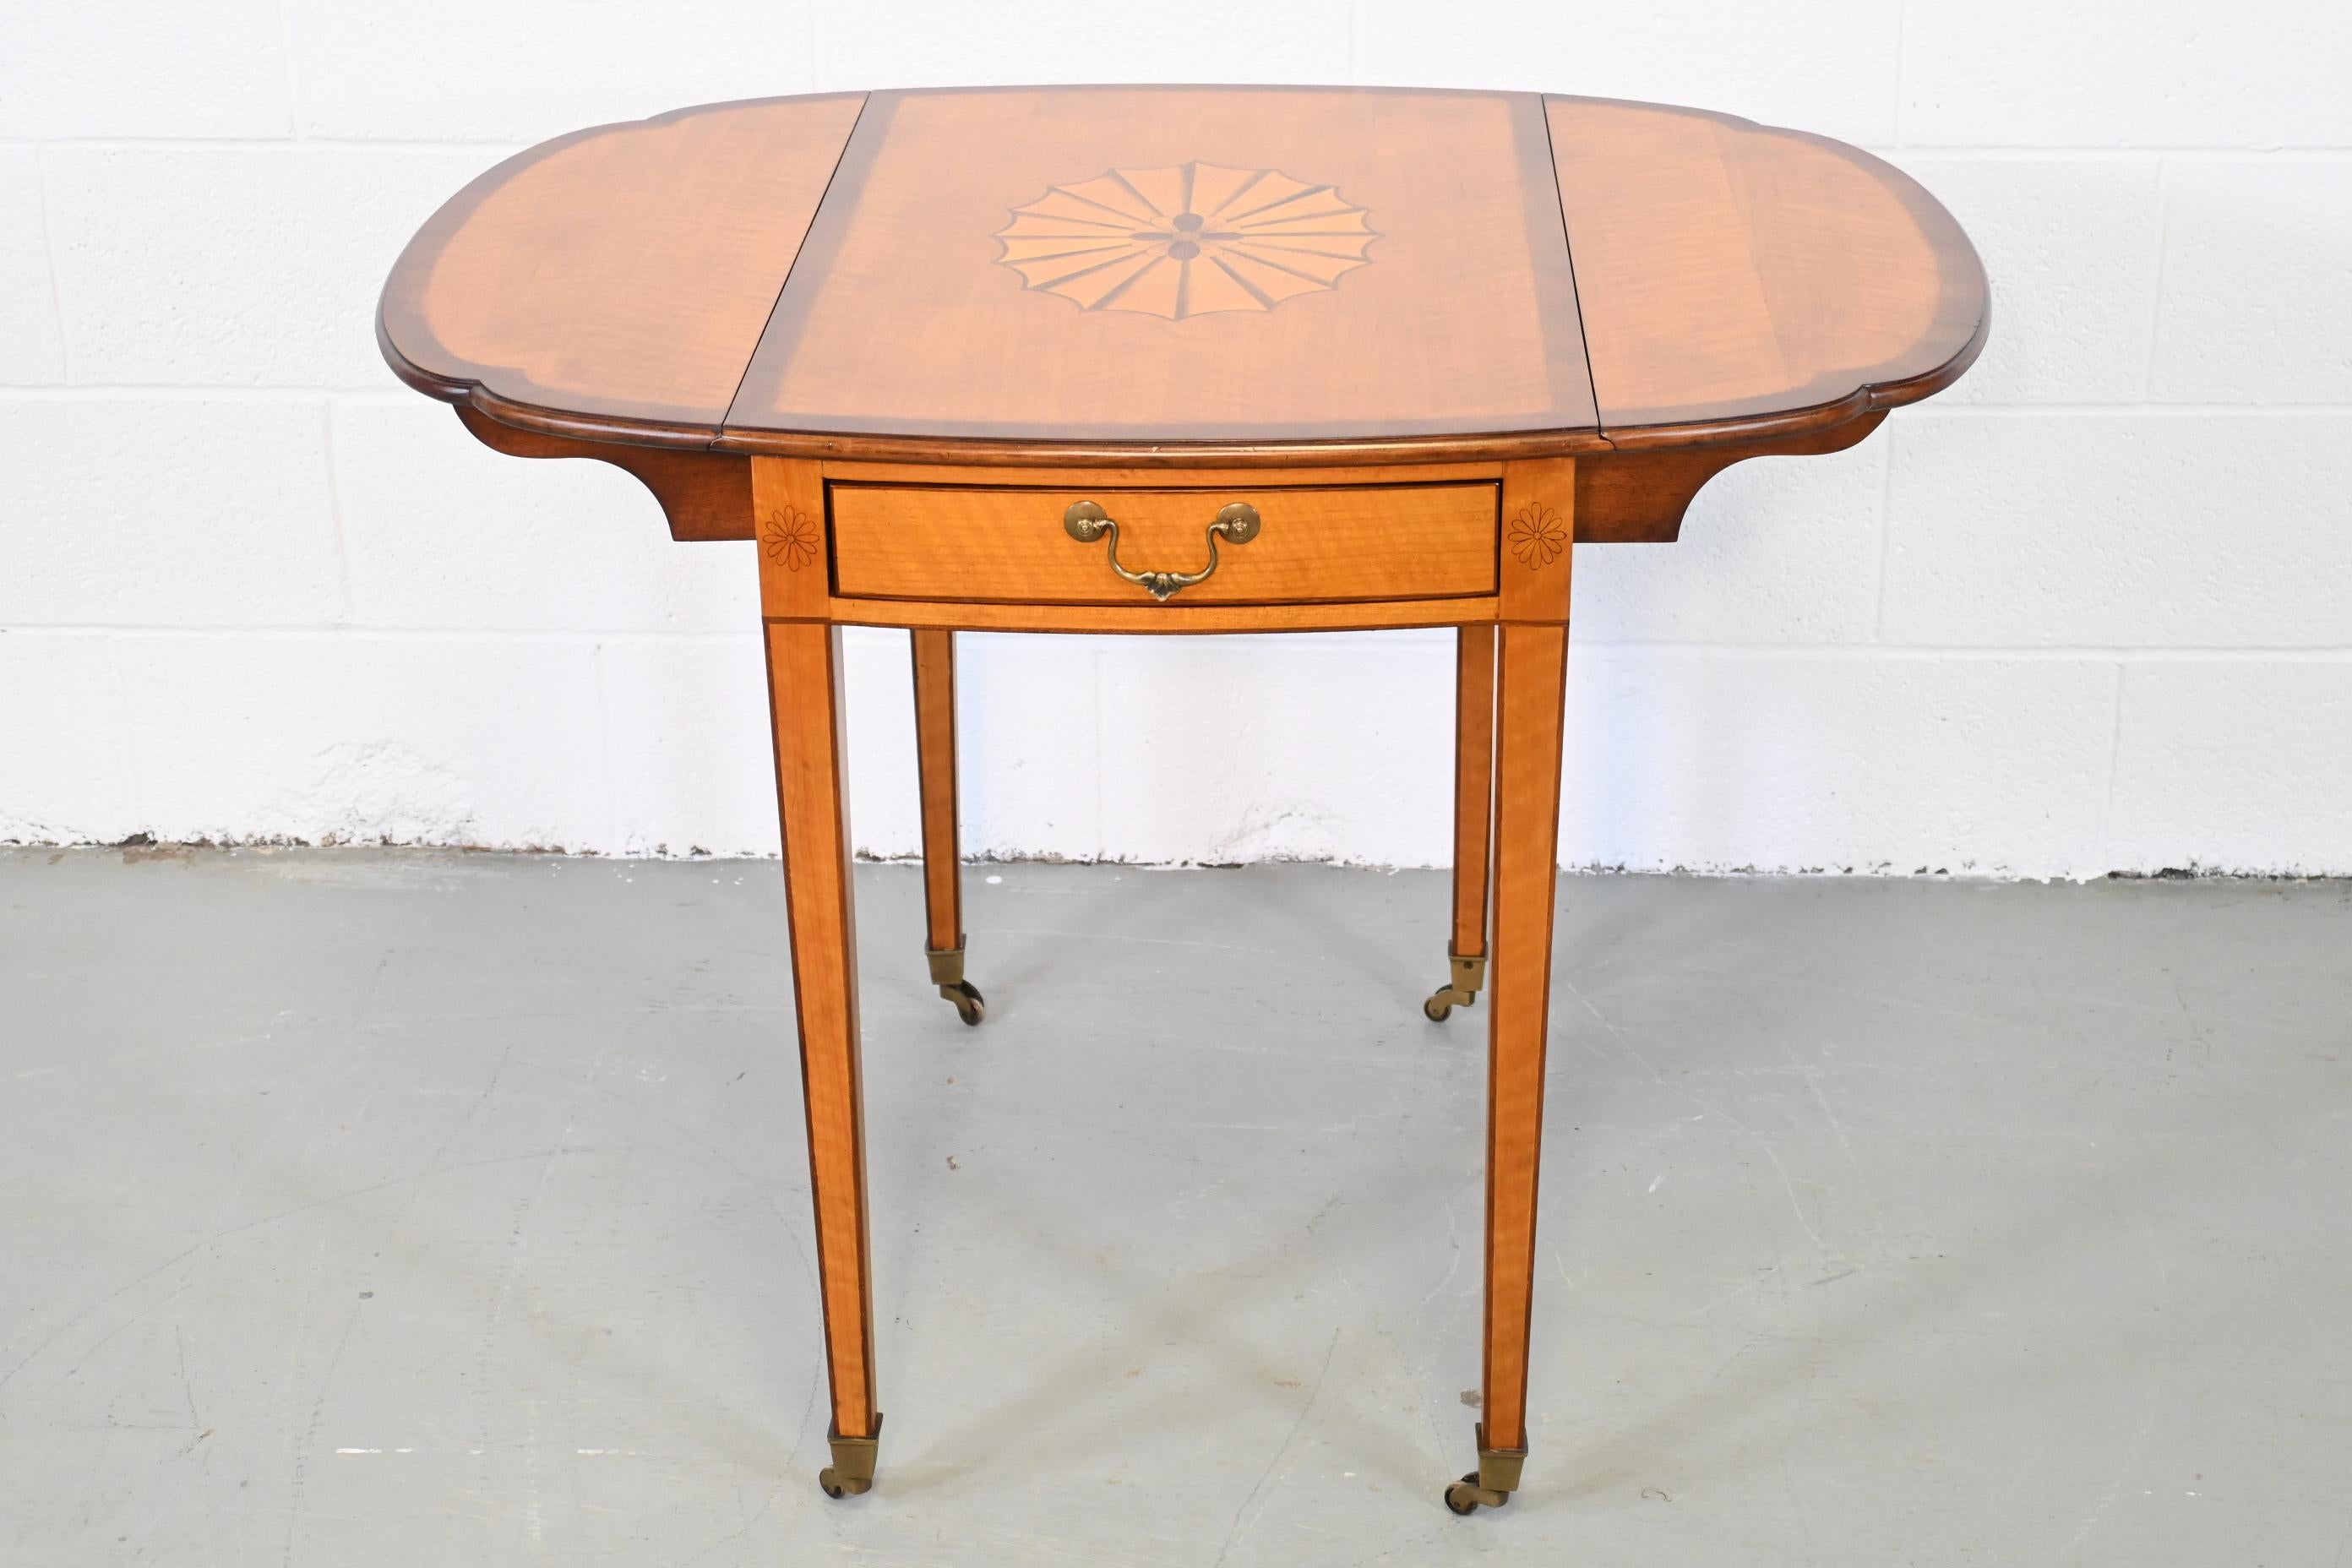 Drexel Heritage pembroke table with drop leaves

Drexel Heritage, USA, 2000s

Measures: 19.5 Wide x 29.25 Deep x 28.25 High. Fully extended 37.88 Wide.

Banded edge drop leaf table with inlaid medallion. Sits on brass